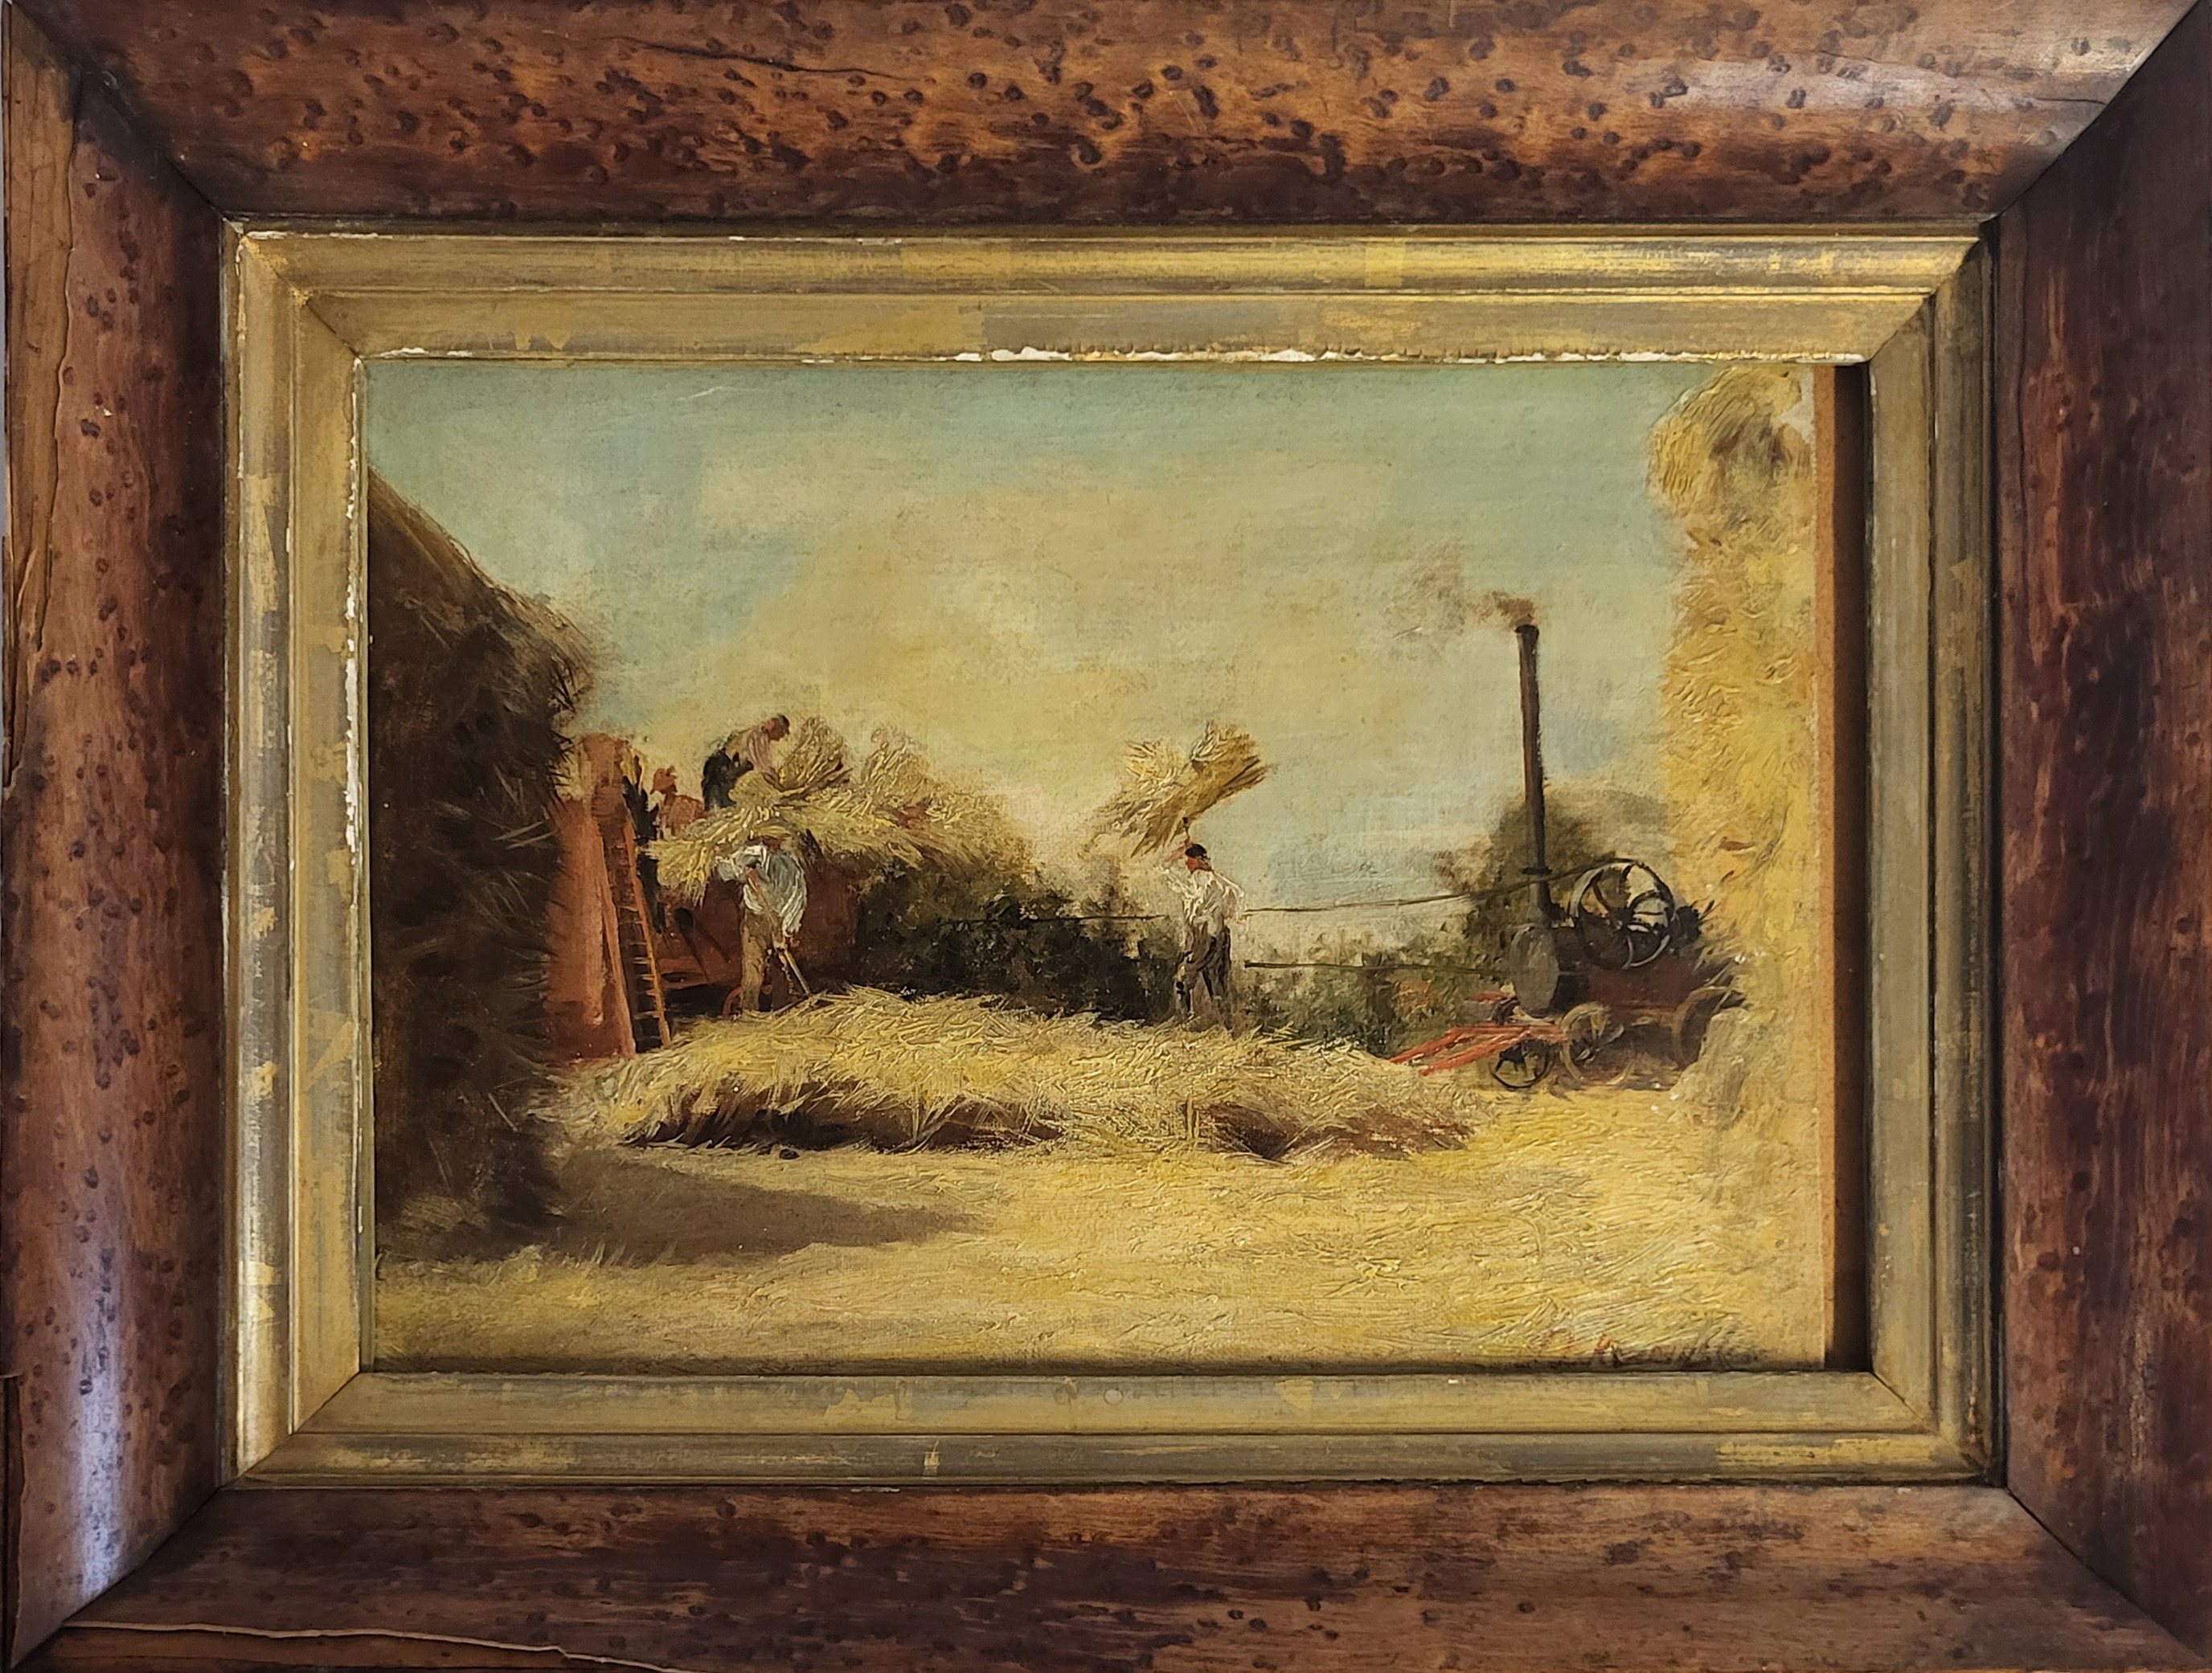 T. KENNINGTON, AN EARLY 20TH CENTURY OIL ON BOARD Titled 'Threshing By Stream', landscape, haymaking - Image 2 of 4